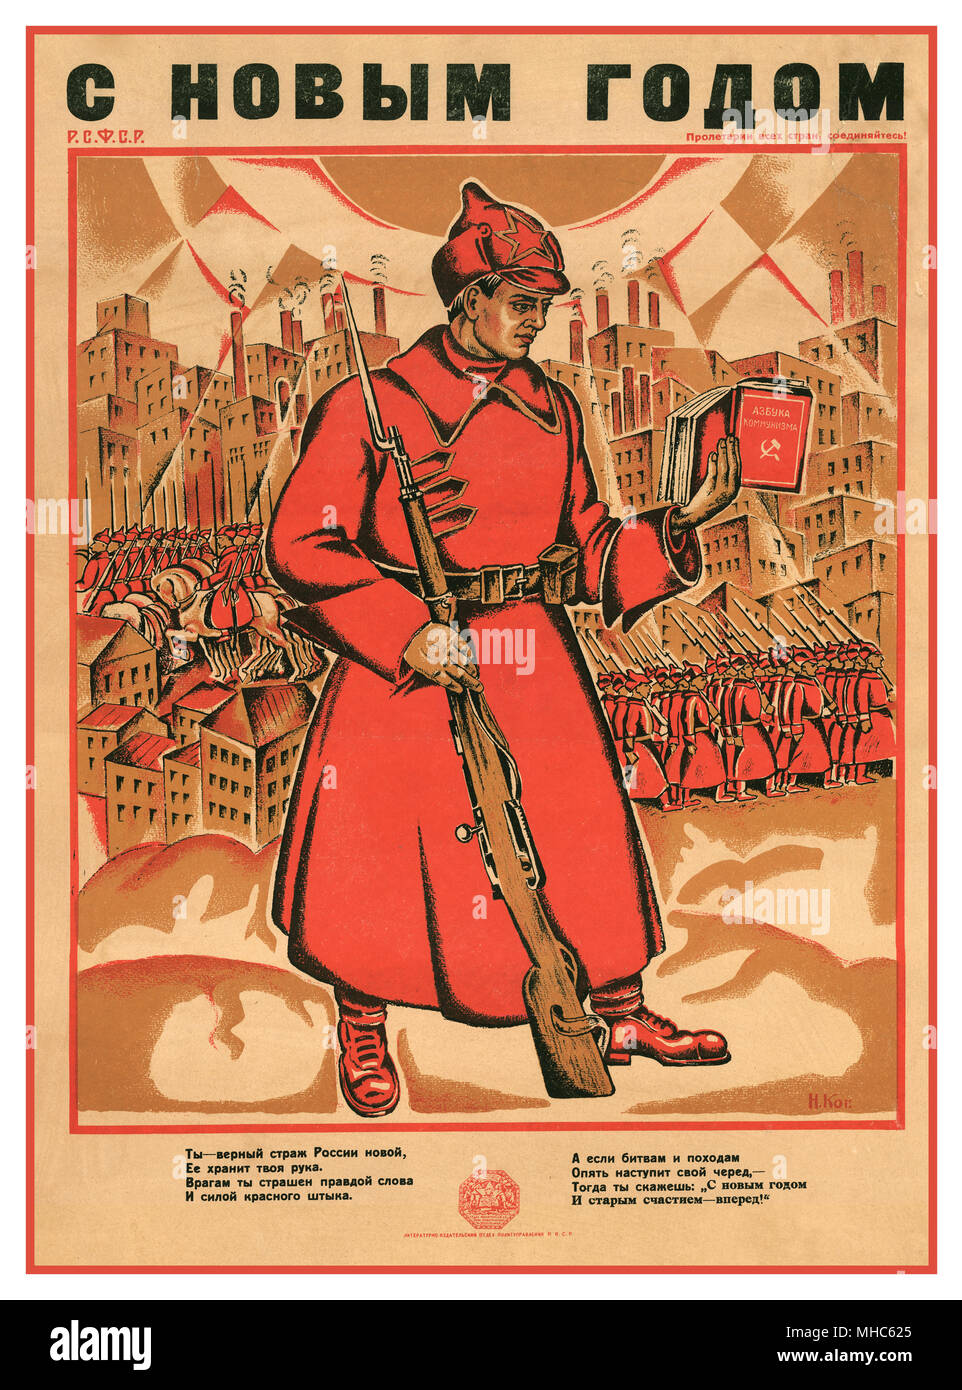 1918-1919  A soldier of the Red Army reads in the book The Alphabet of Communism' A Happy New Year and New Era The city in the background refers to the origin of the new Red Soldier from the urban proletariat. This is confirmed by the small subtitle on the top right: 'Proletarians of the whole country, unite!' It is composed of Cubist elements and Russian Revolution metaphors Stock Photo